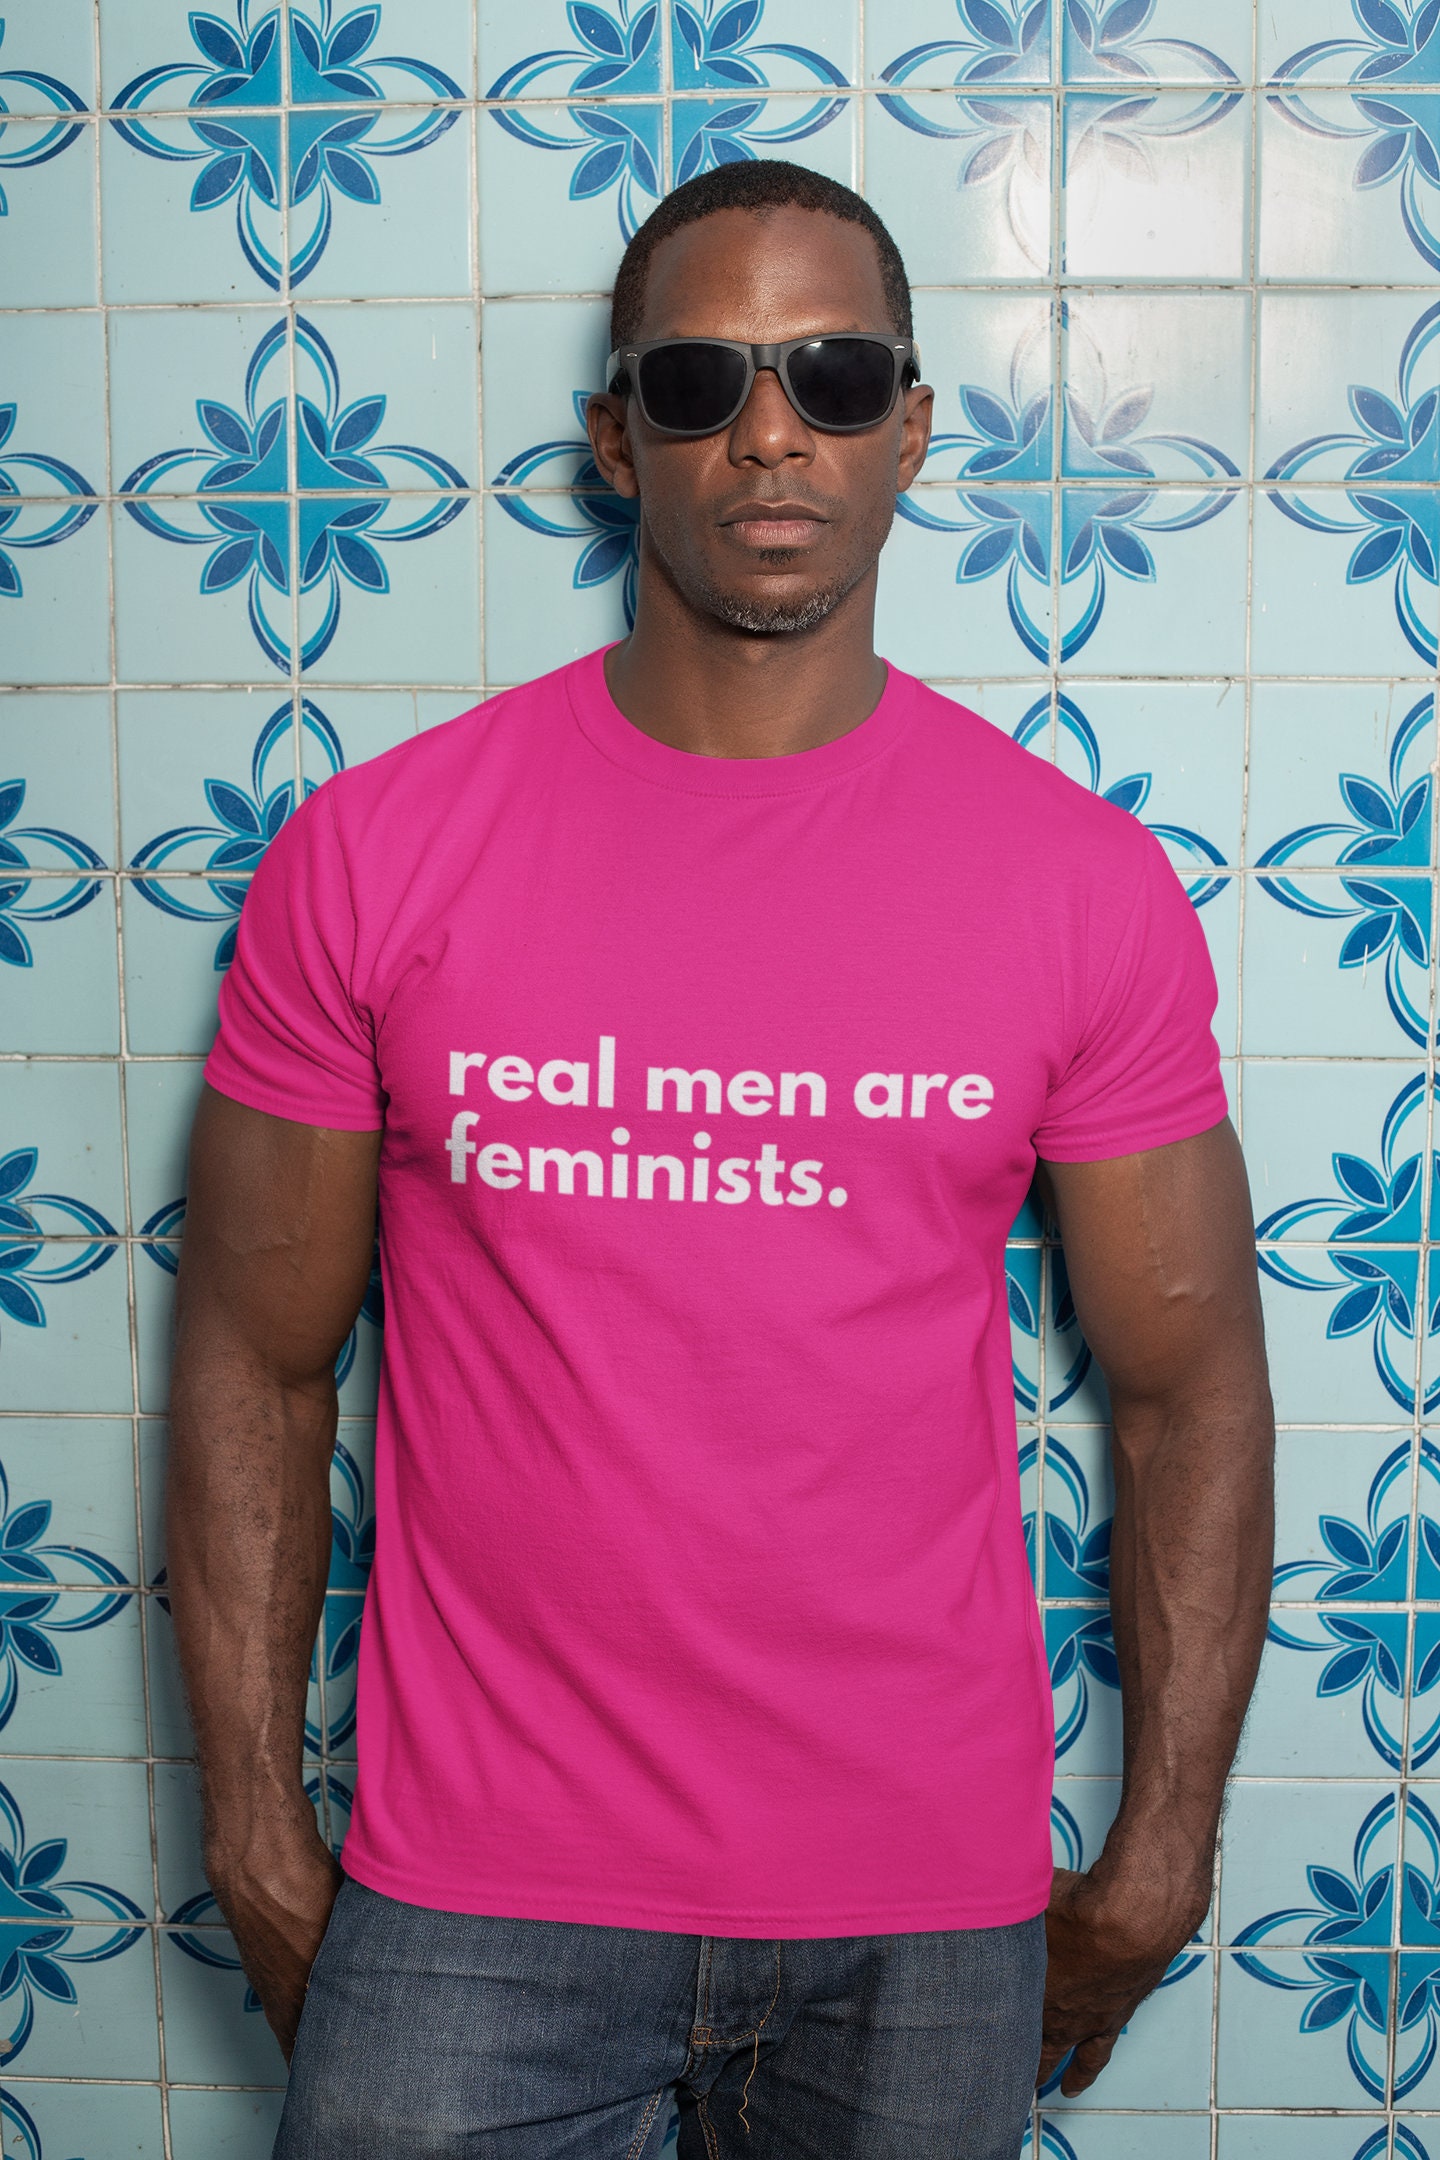 Male Feminist T Shirts for Men Real Men Are Feminists -